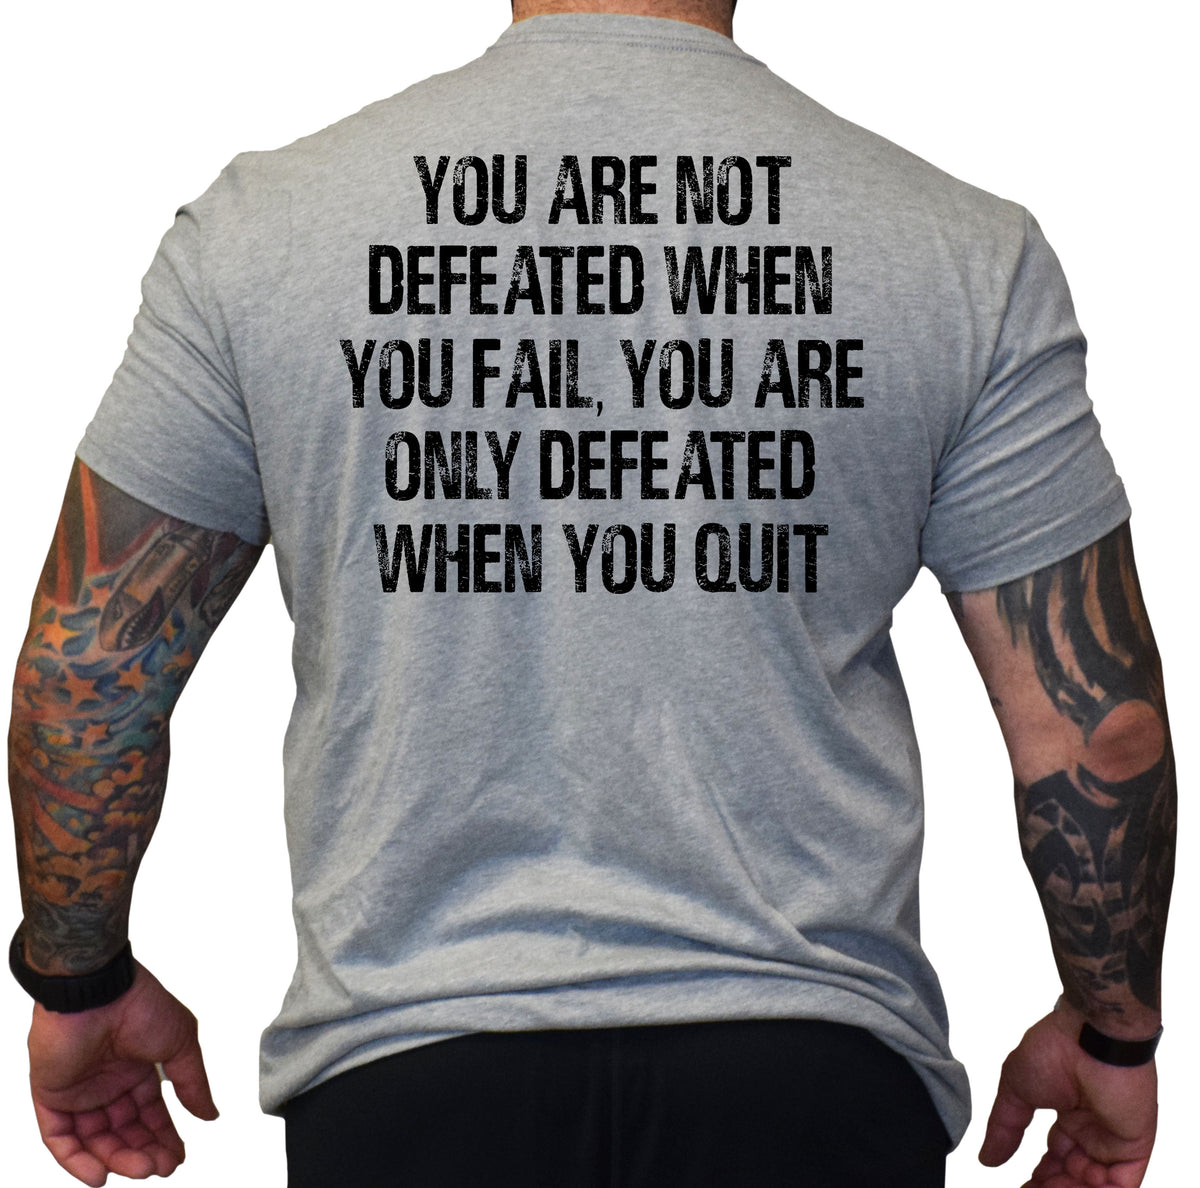 Subdued Shirt – Never Defeated